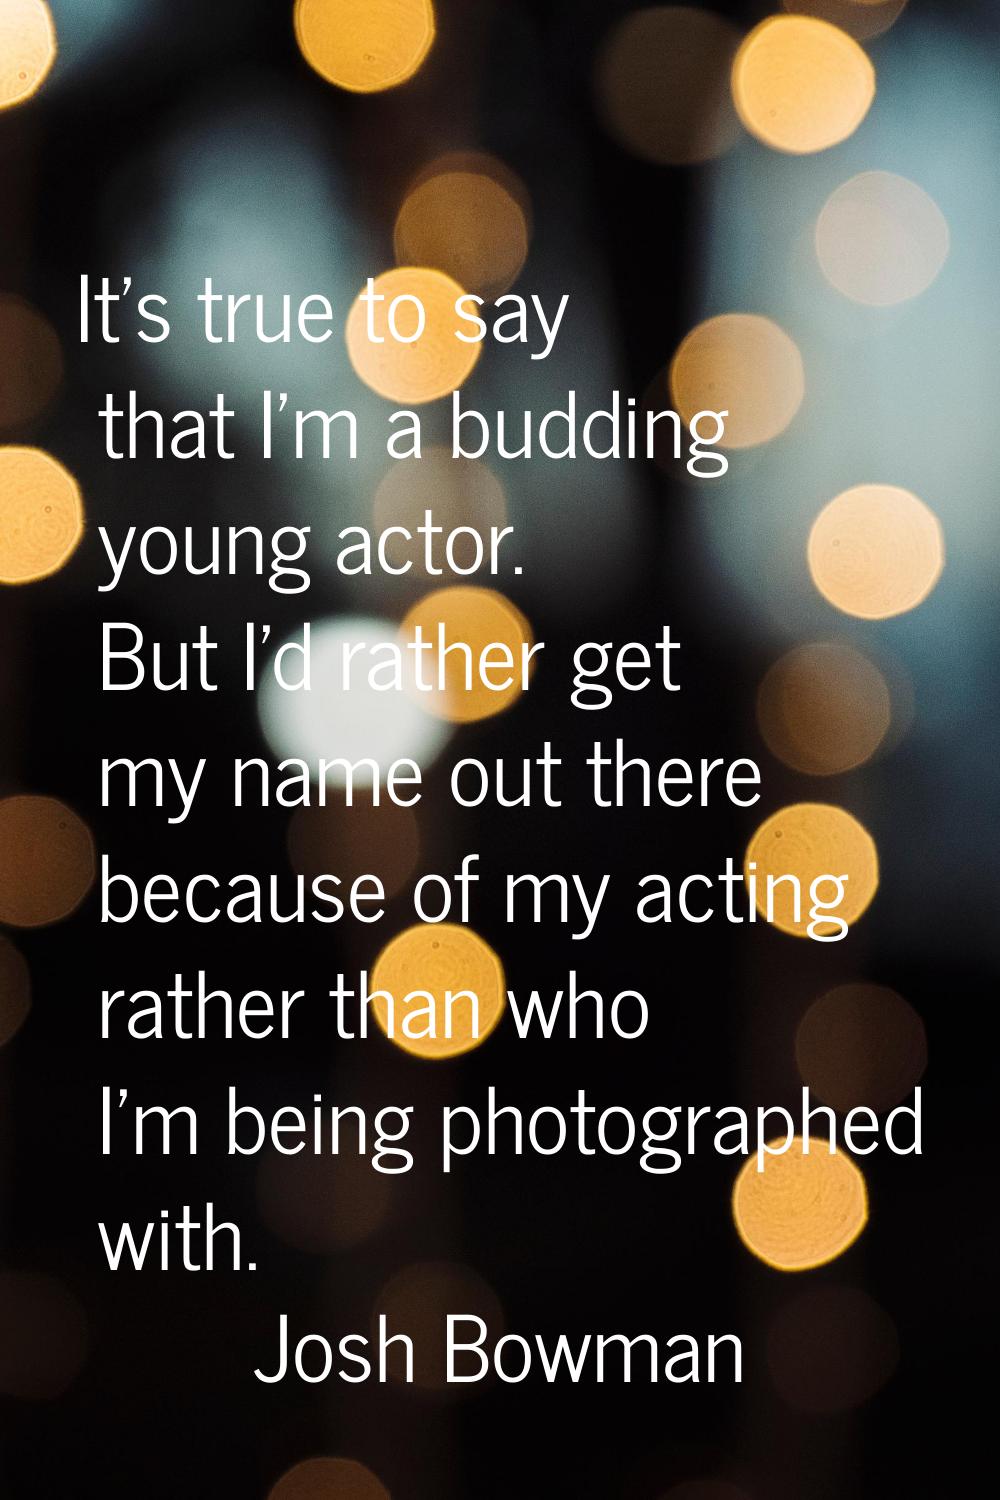 It's true to say that I'm a budding young actor. But I'd rather get my name out there because of my